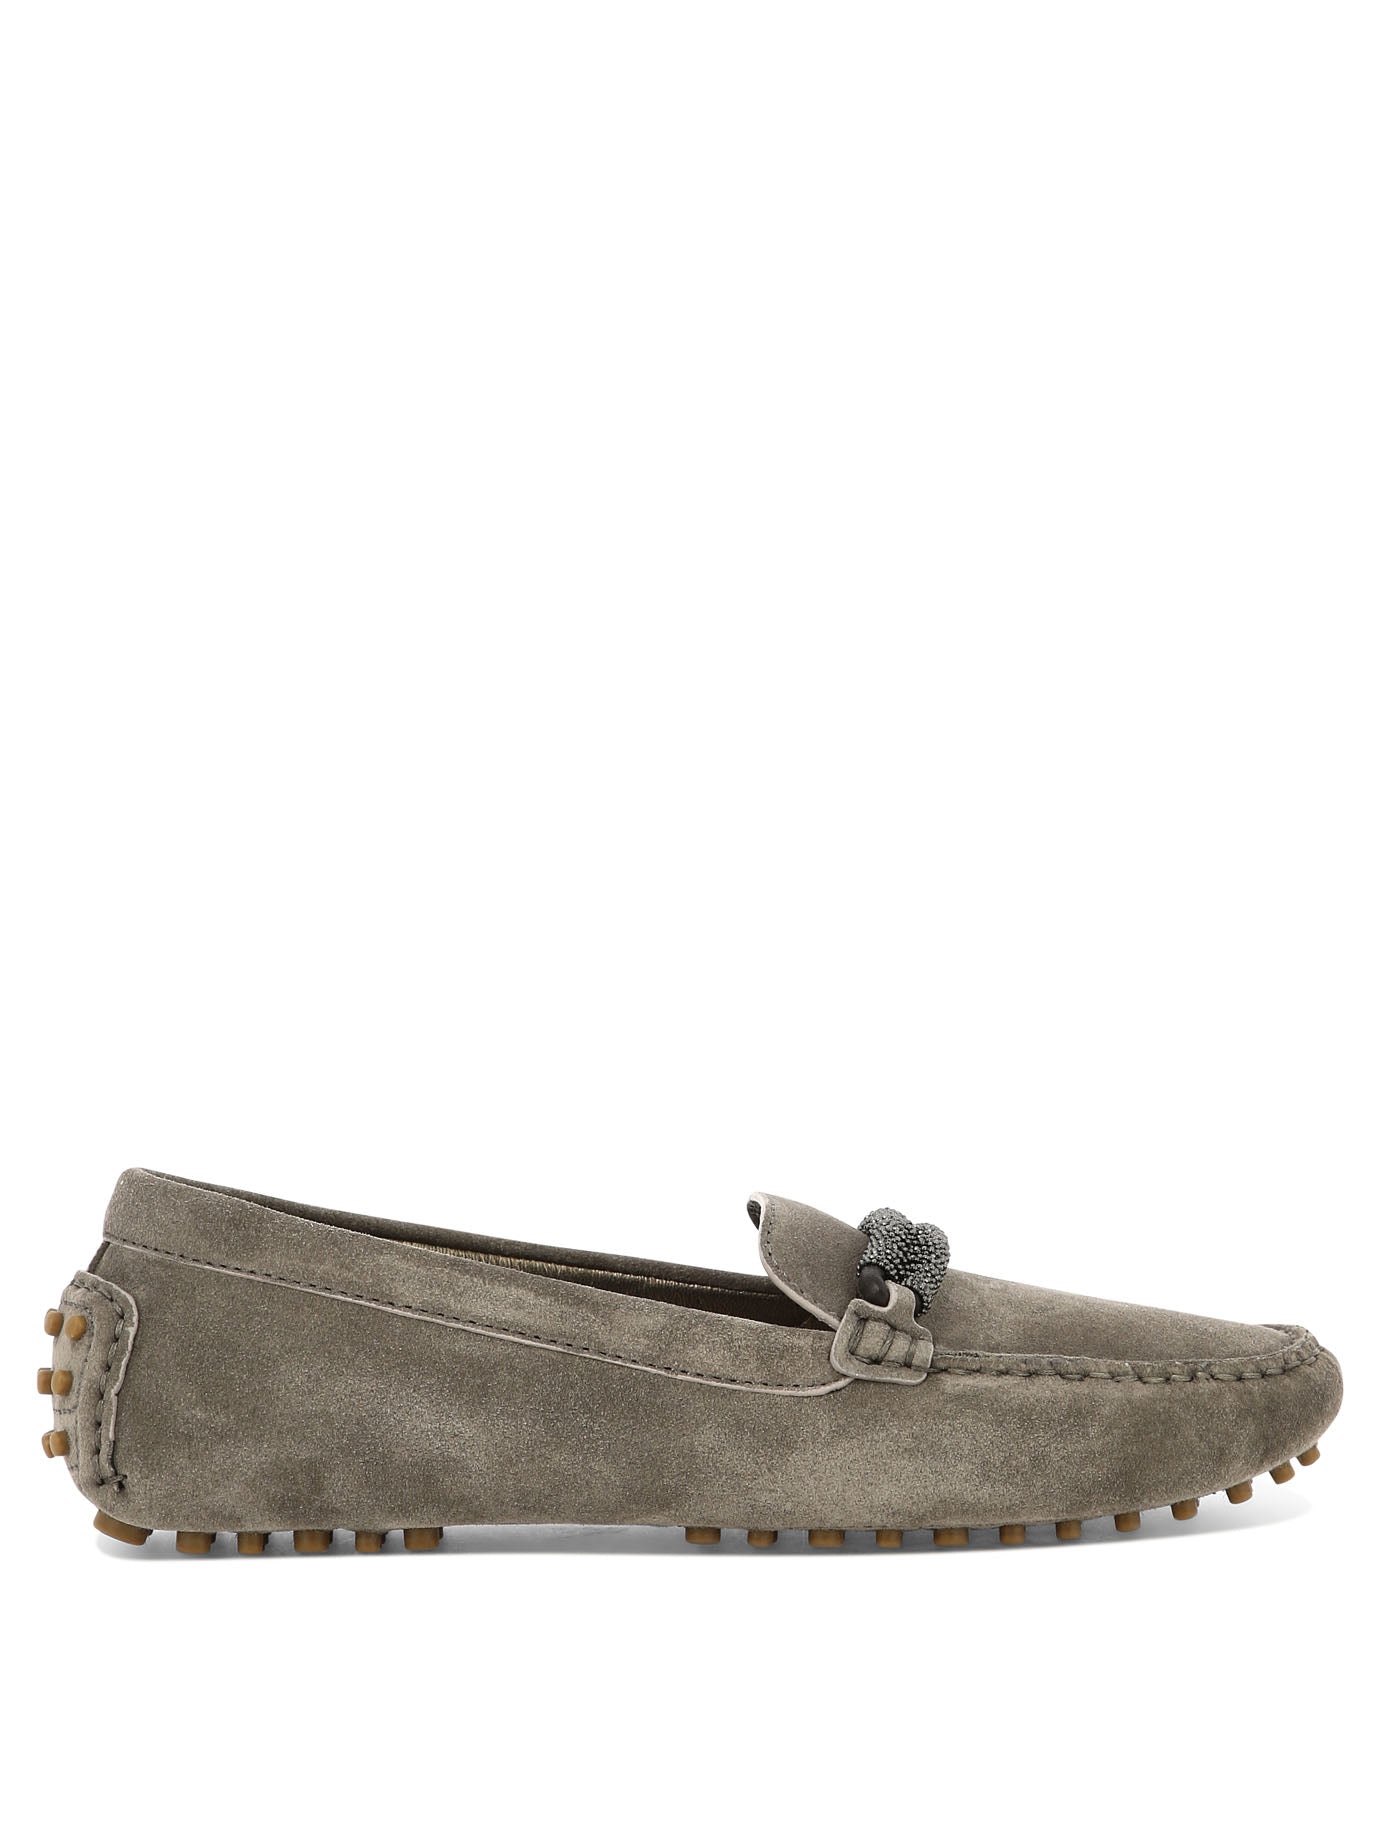 Brunello Cucinelli Stylish Suede Moccasins For Women In Brown